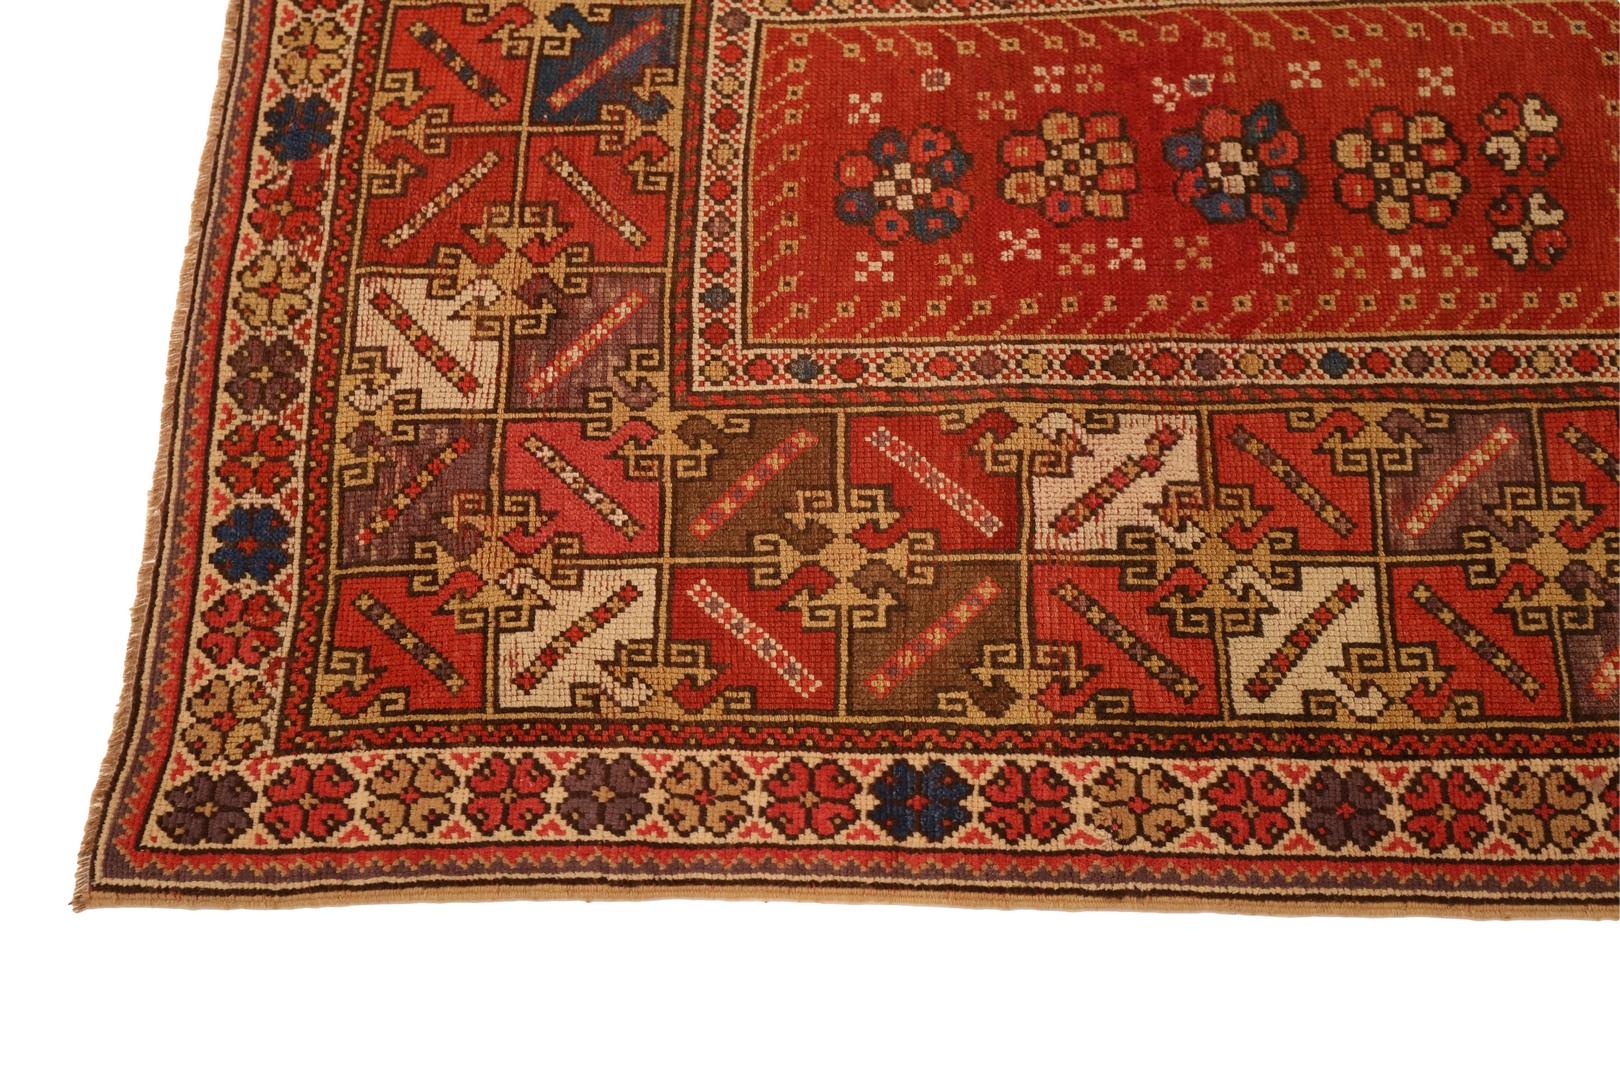 Wool Turkish Antique Rug, Red Ivory Aubergine - 4 x 6 For Sale